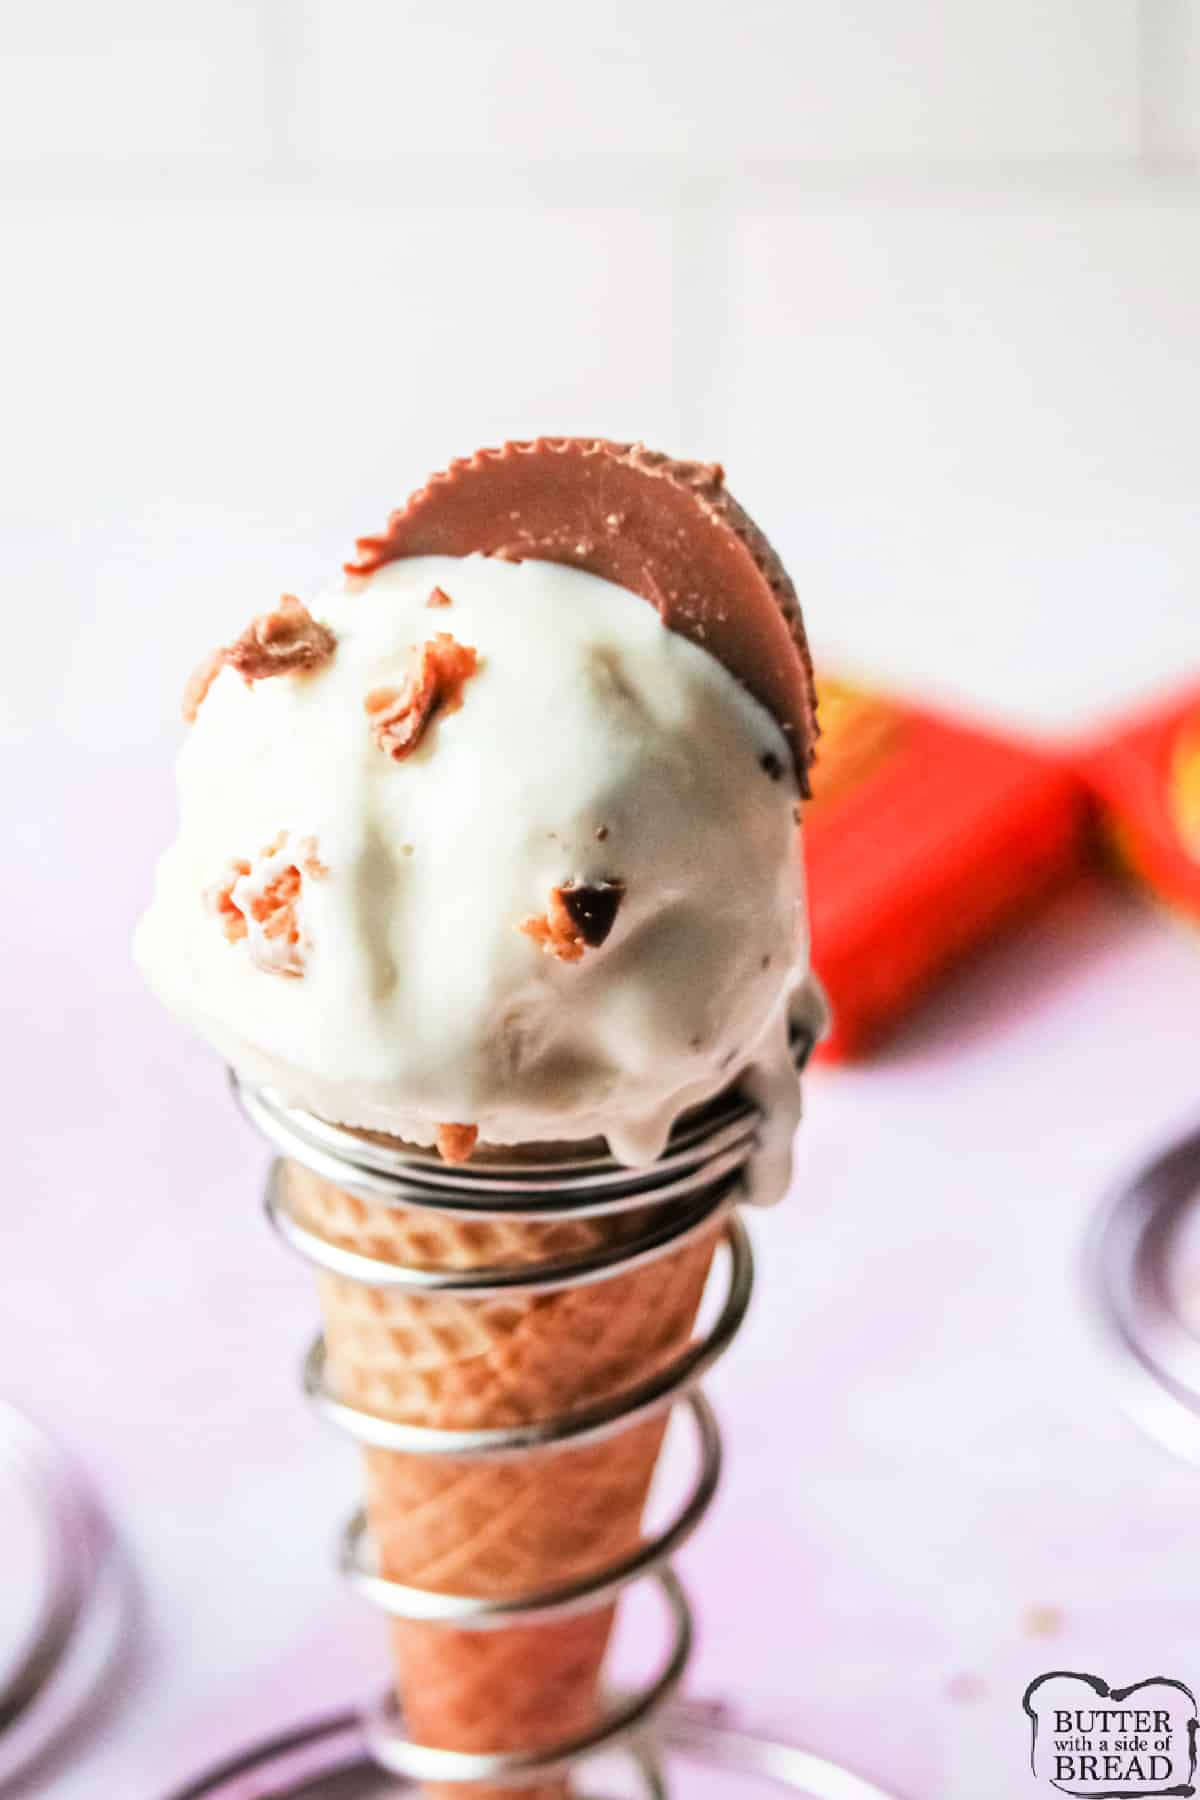 Reese's Peanut Butter Cup Ice Cream is made with only 6 ingredients, no ice cream maker required! Deliciously creamy vanilla ice cream recipe made with Reese's Peanut Butter Cups. 